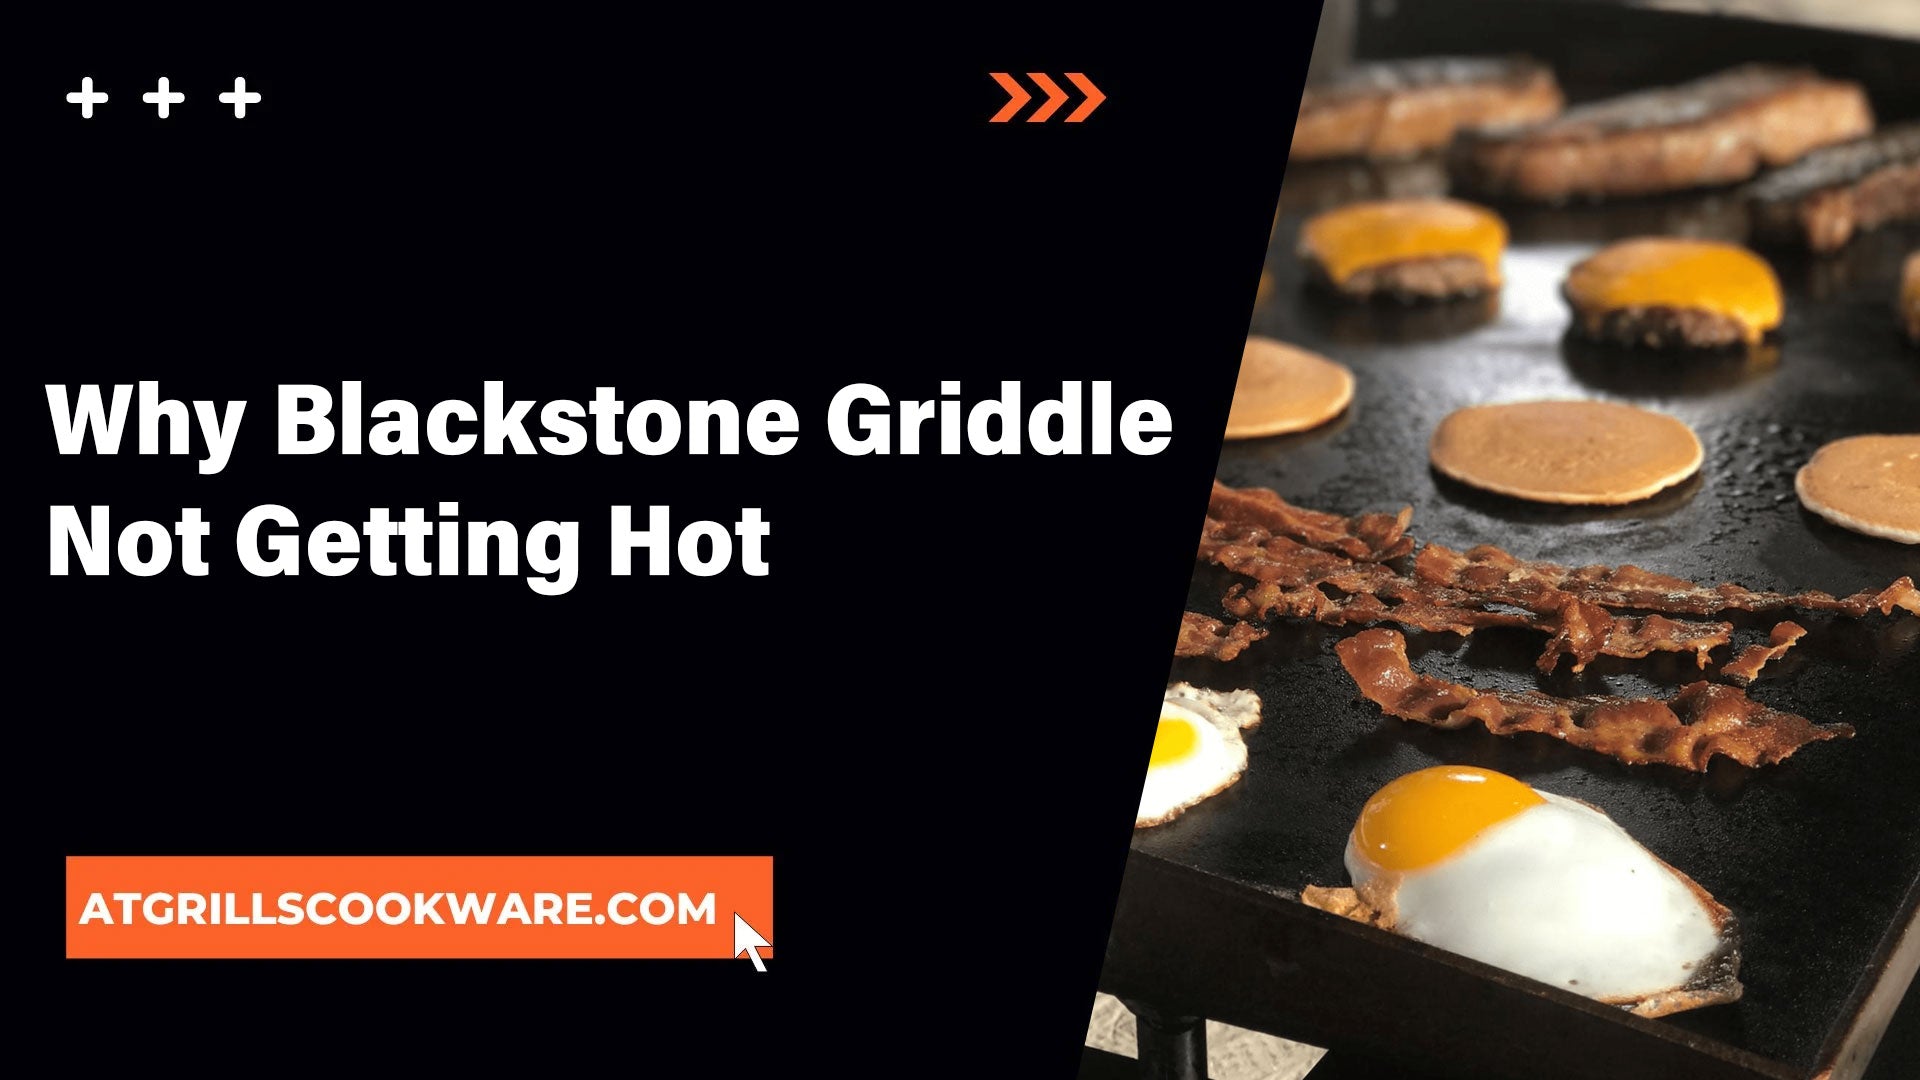 Why Is Blackstone Griddle Not Getting Hot